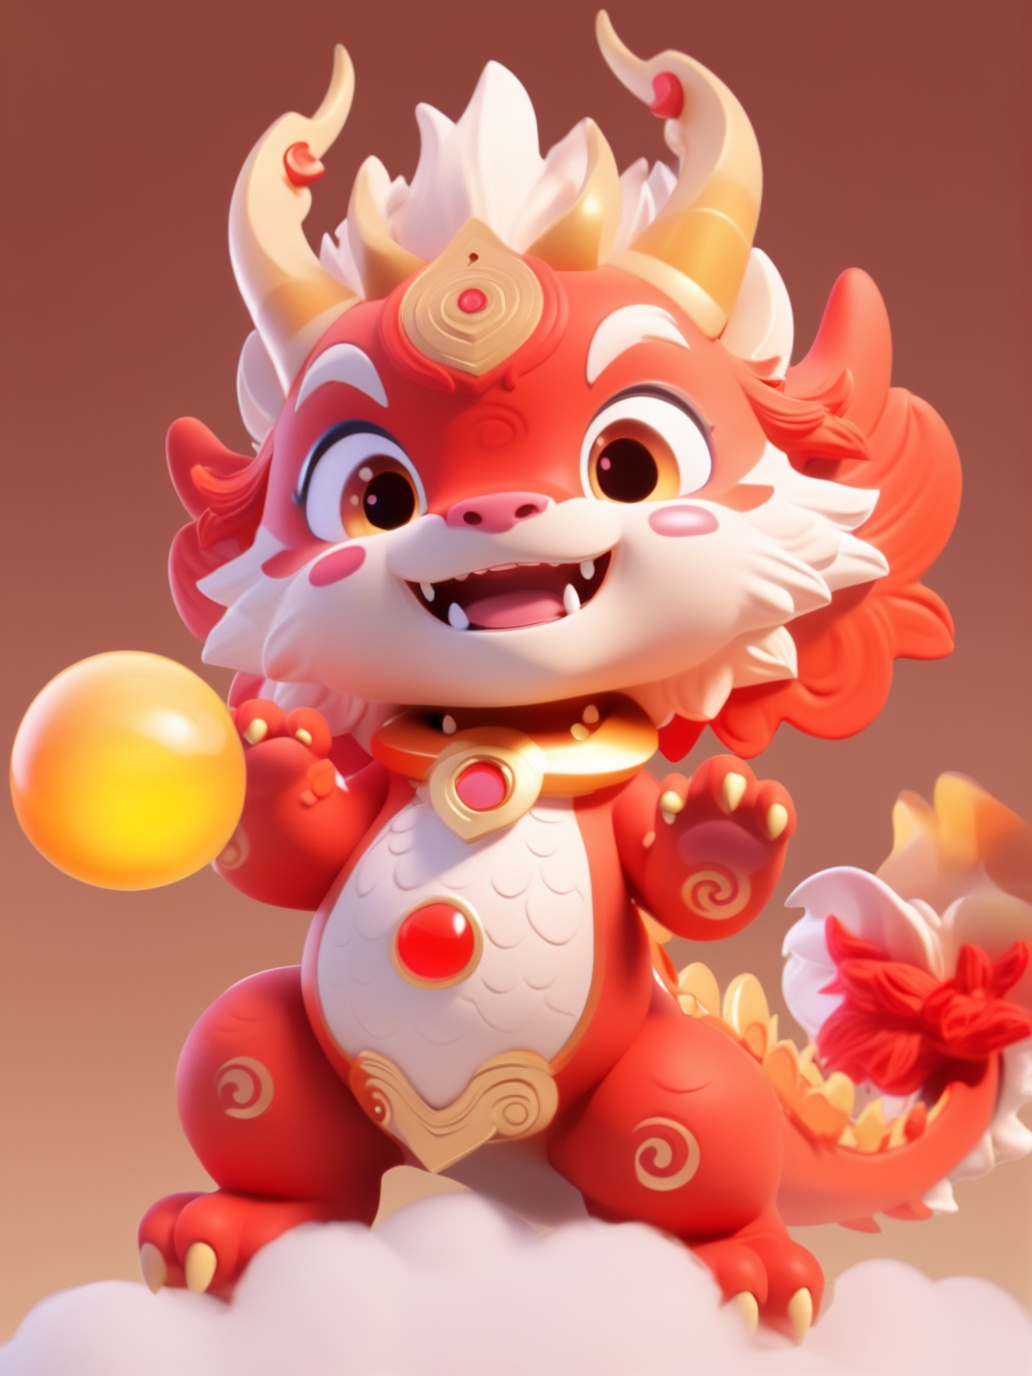 a vibrant and animated character that appears to be a fusion of a dragon and a lion. The character has a bright red body with white and gold accents, especially around its mane and crown. It has large, expressive eyes and a cheerful expression. The character is adorned with a golden crown, a red gem on its forehead, and a golden collar. It is also seen holding a glowing, yellowish orb or moon-like object in its hand. The background is a gradient of warm colors, transitioning from a light peach to a deeper orange, giving the image a warm and inviting feel<lora:LONG IP:1>